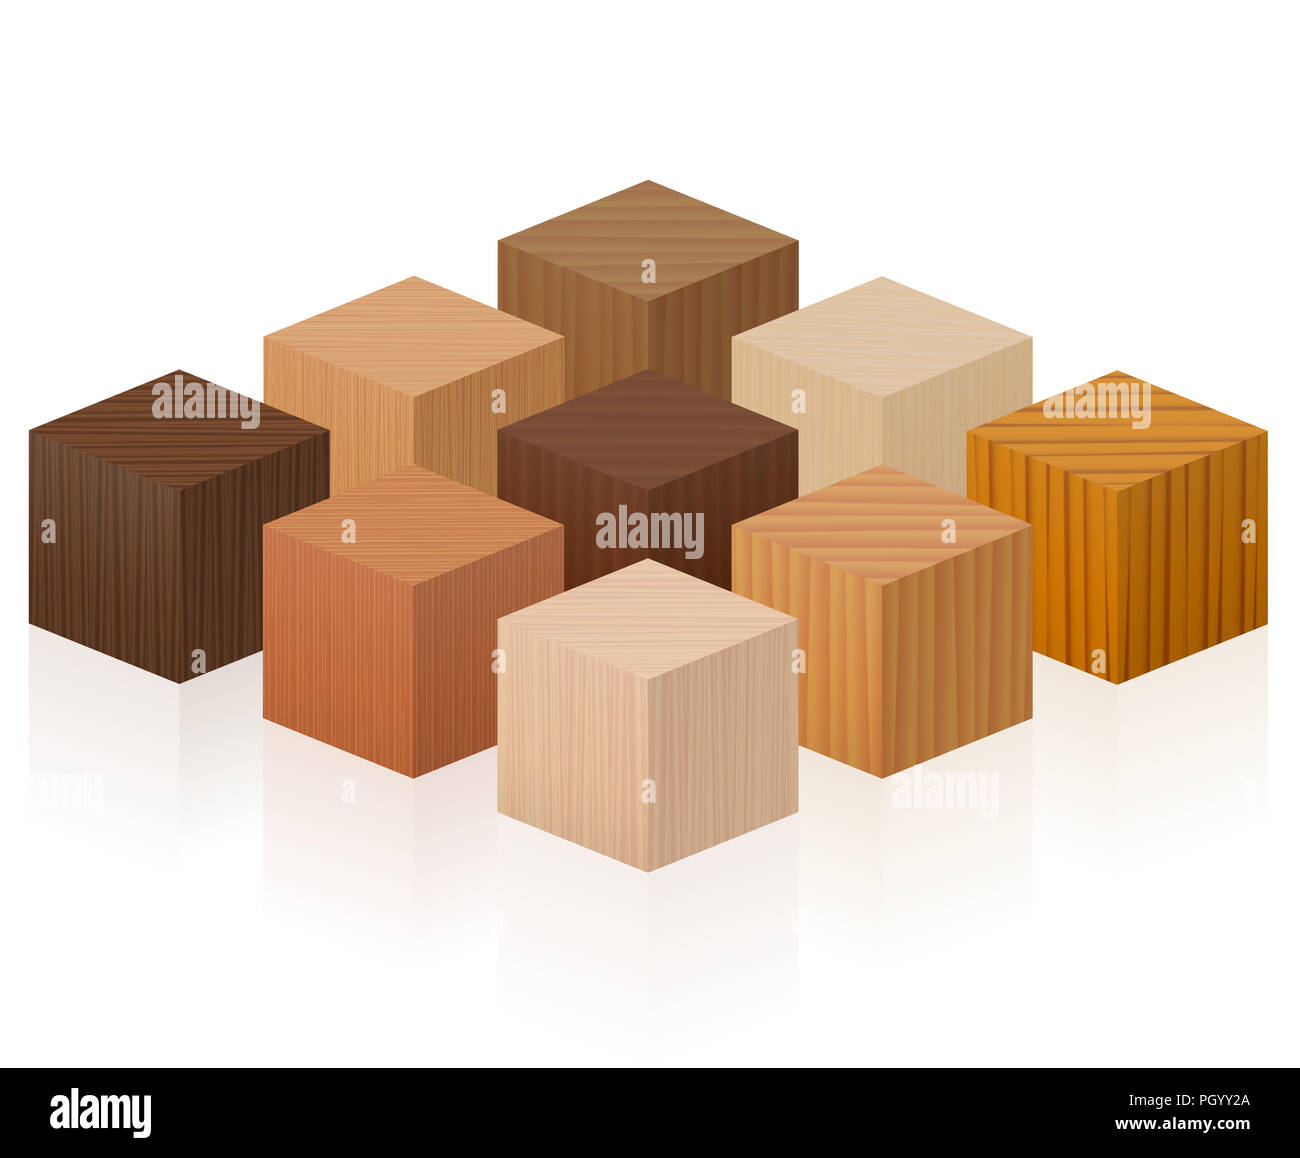 Wooden cubes - wood samples with different textures, colors, glazes, from various trees to choose - brown, dark, gray, light, red, yellow, orange. Stock Photo